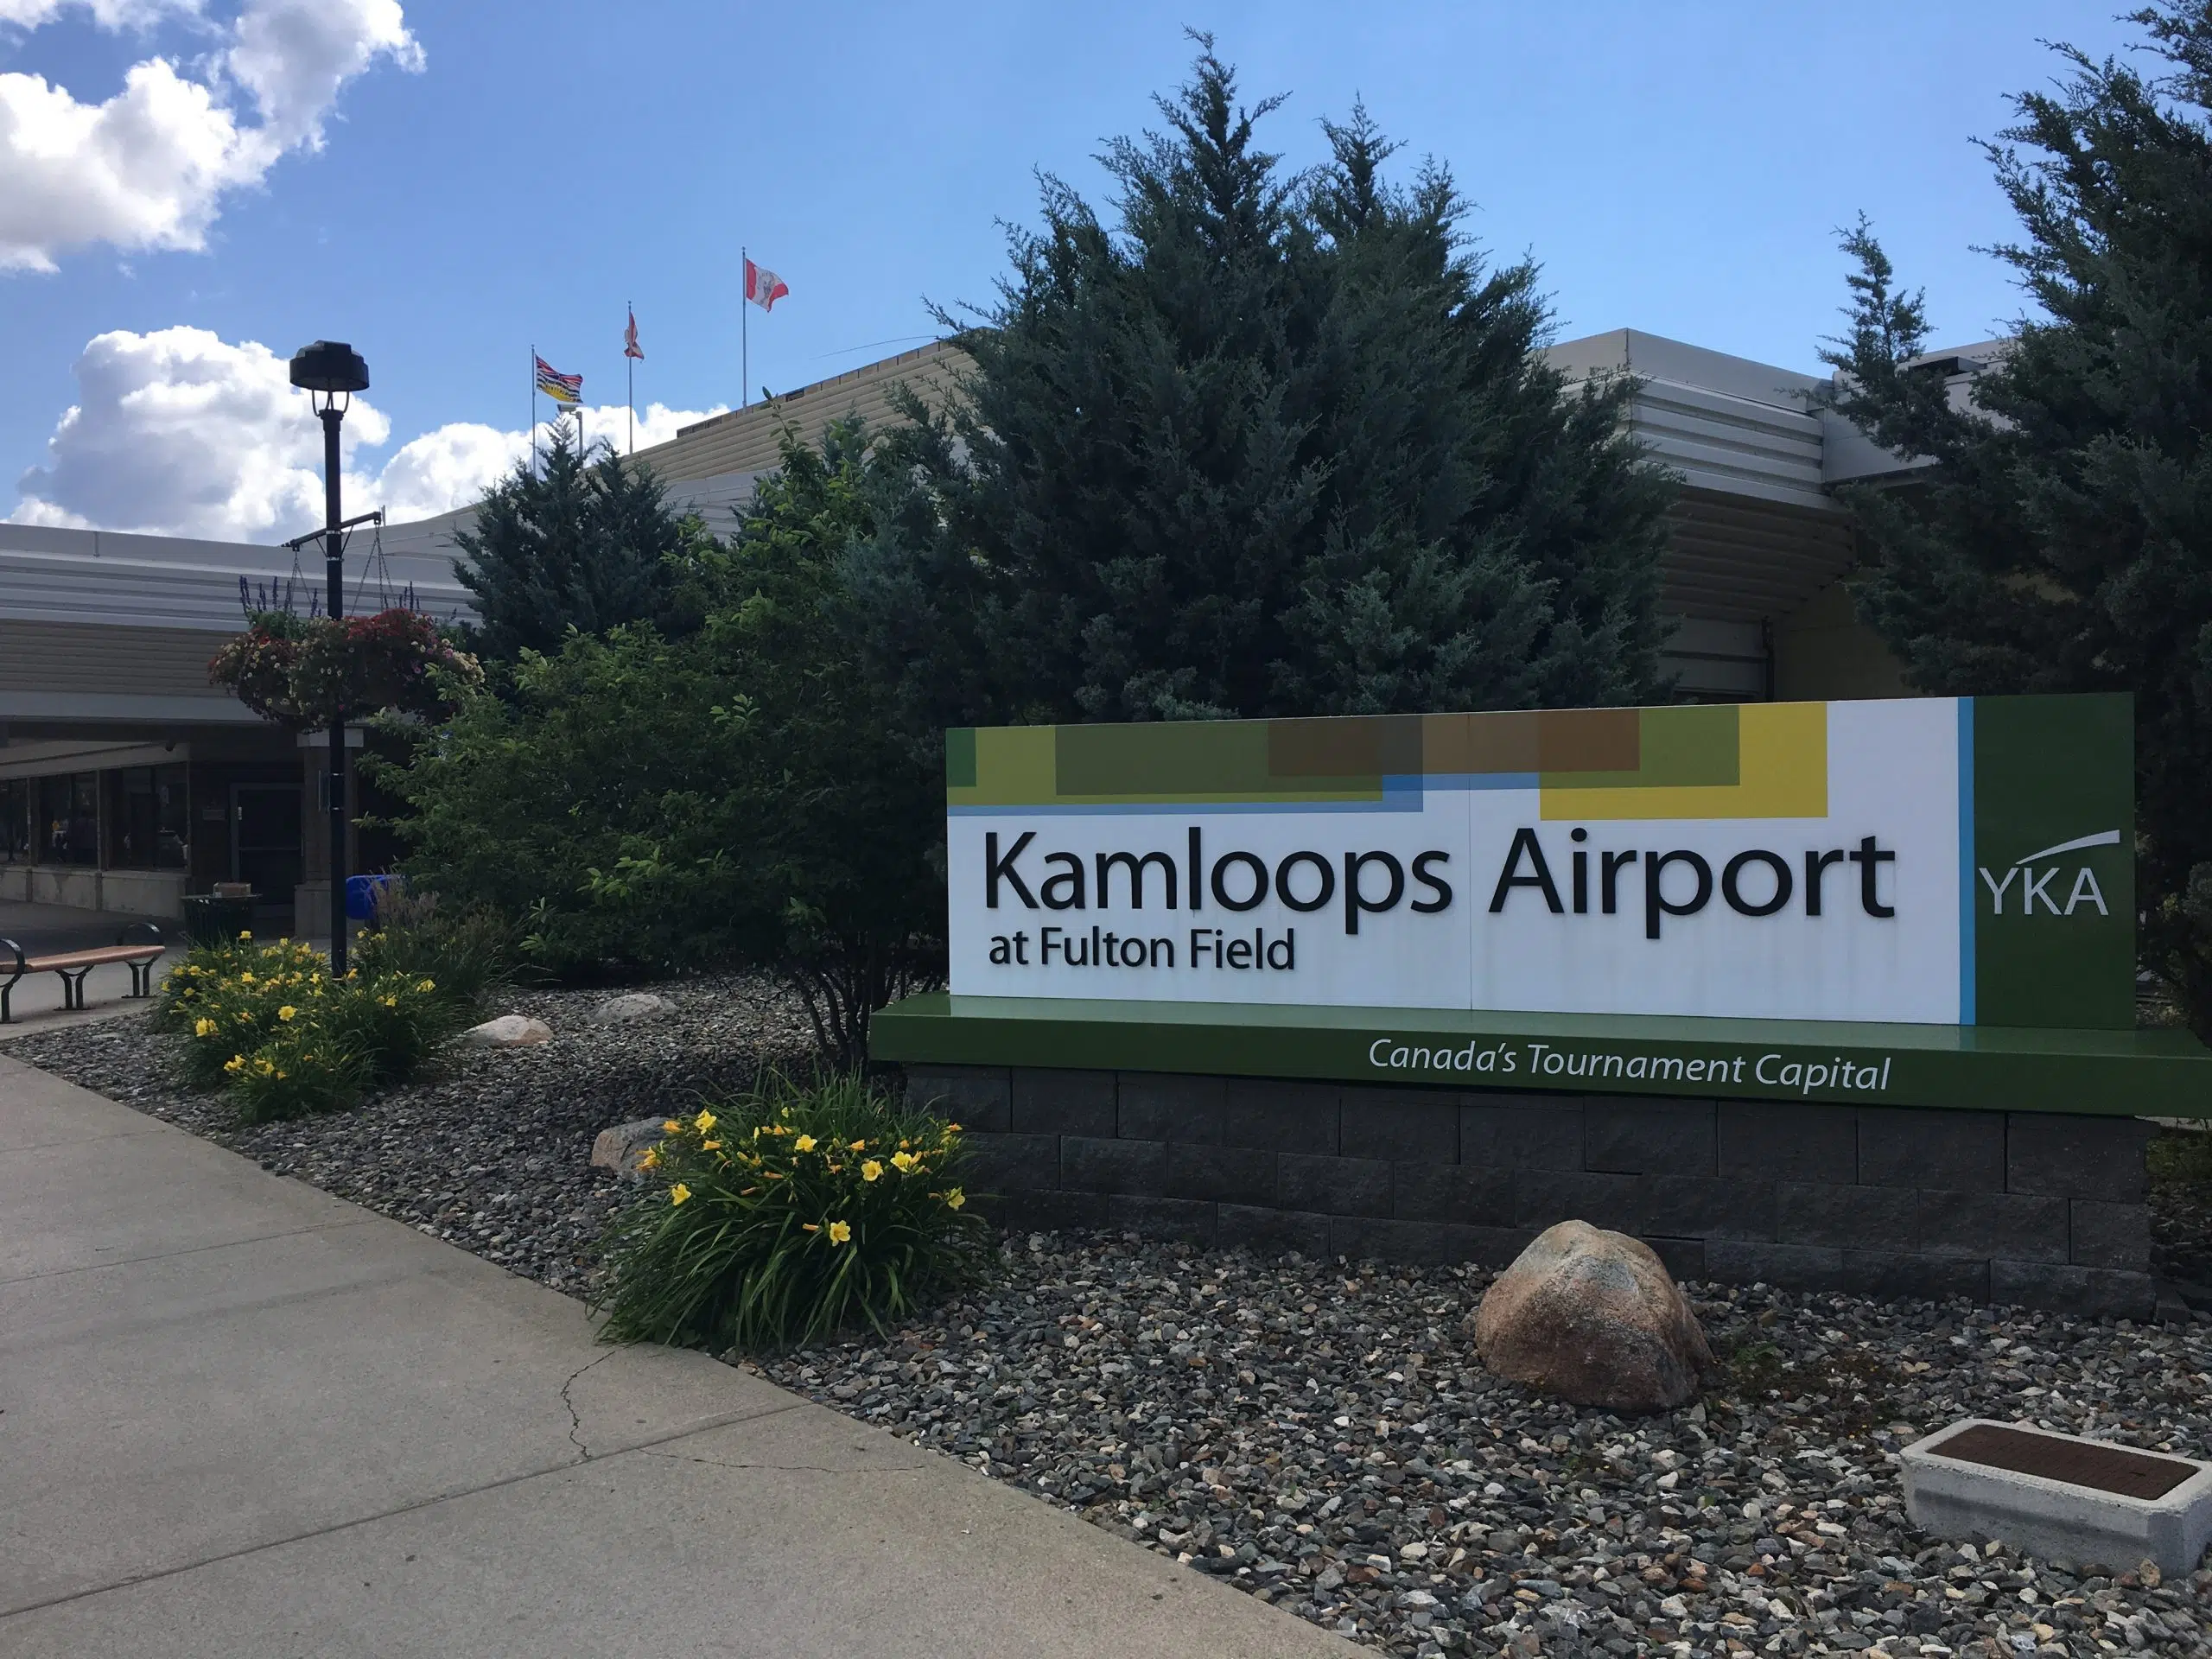 Passenger volumes at Kamloops Airport remain low in first three months of 2021